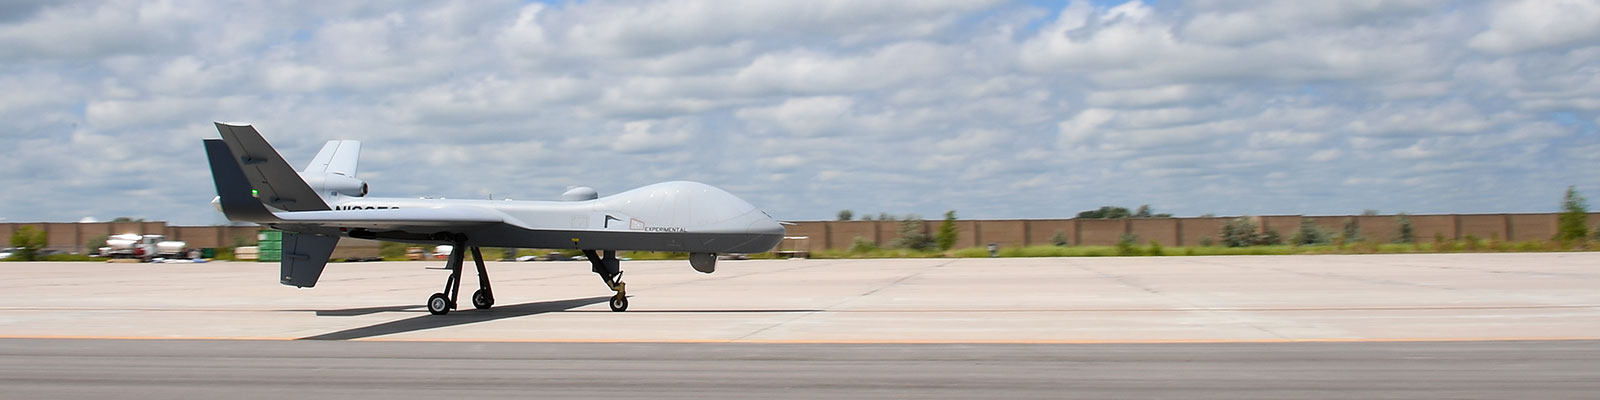 Unmanned aircraft on the runway of the UAS test site